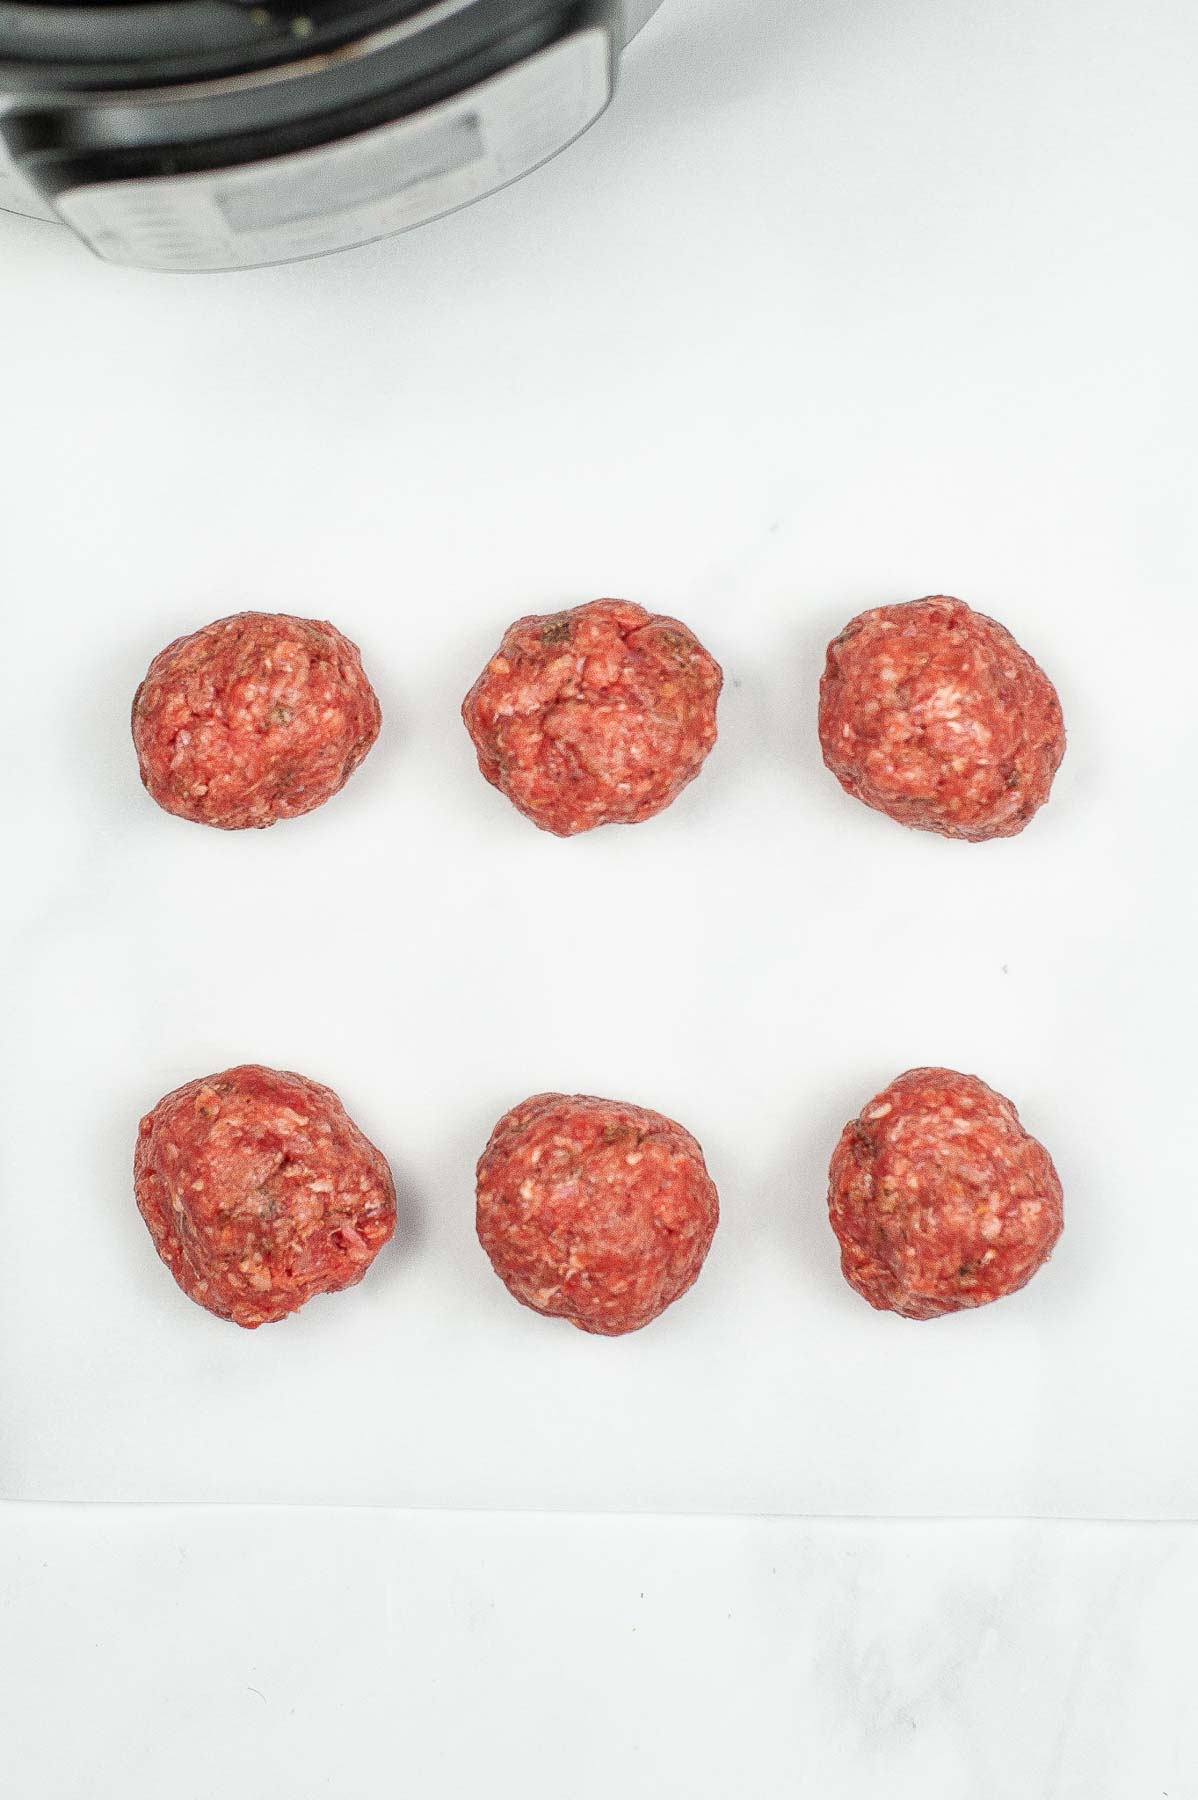 Seasoned ground beef divided into 6 balls.